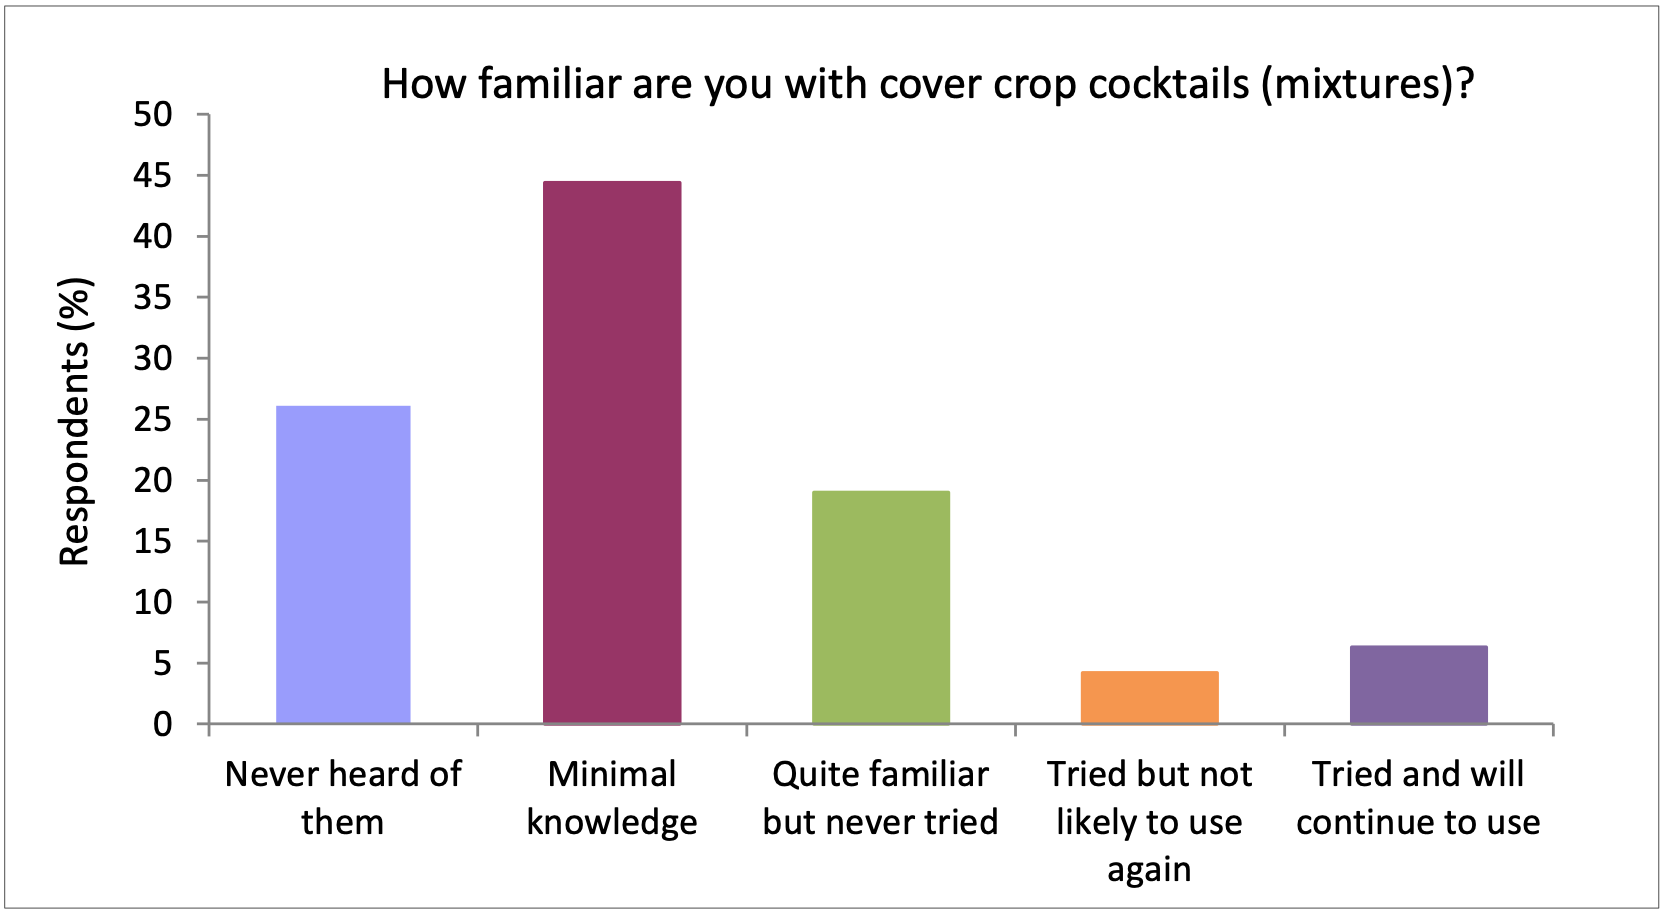  Most respondents had never heard of, or knew little about, cover crop cocktails. N=142